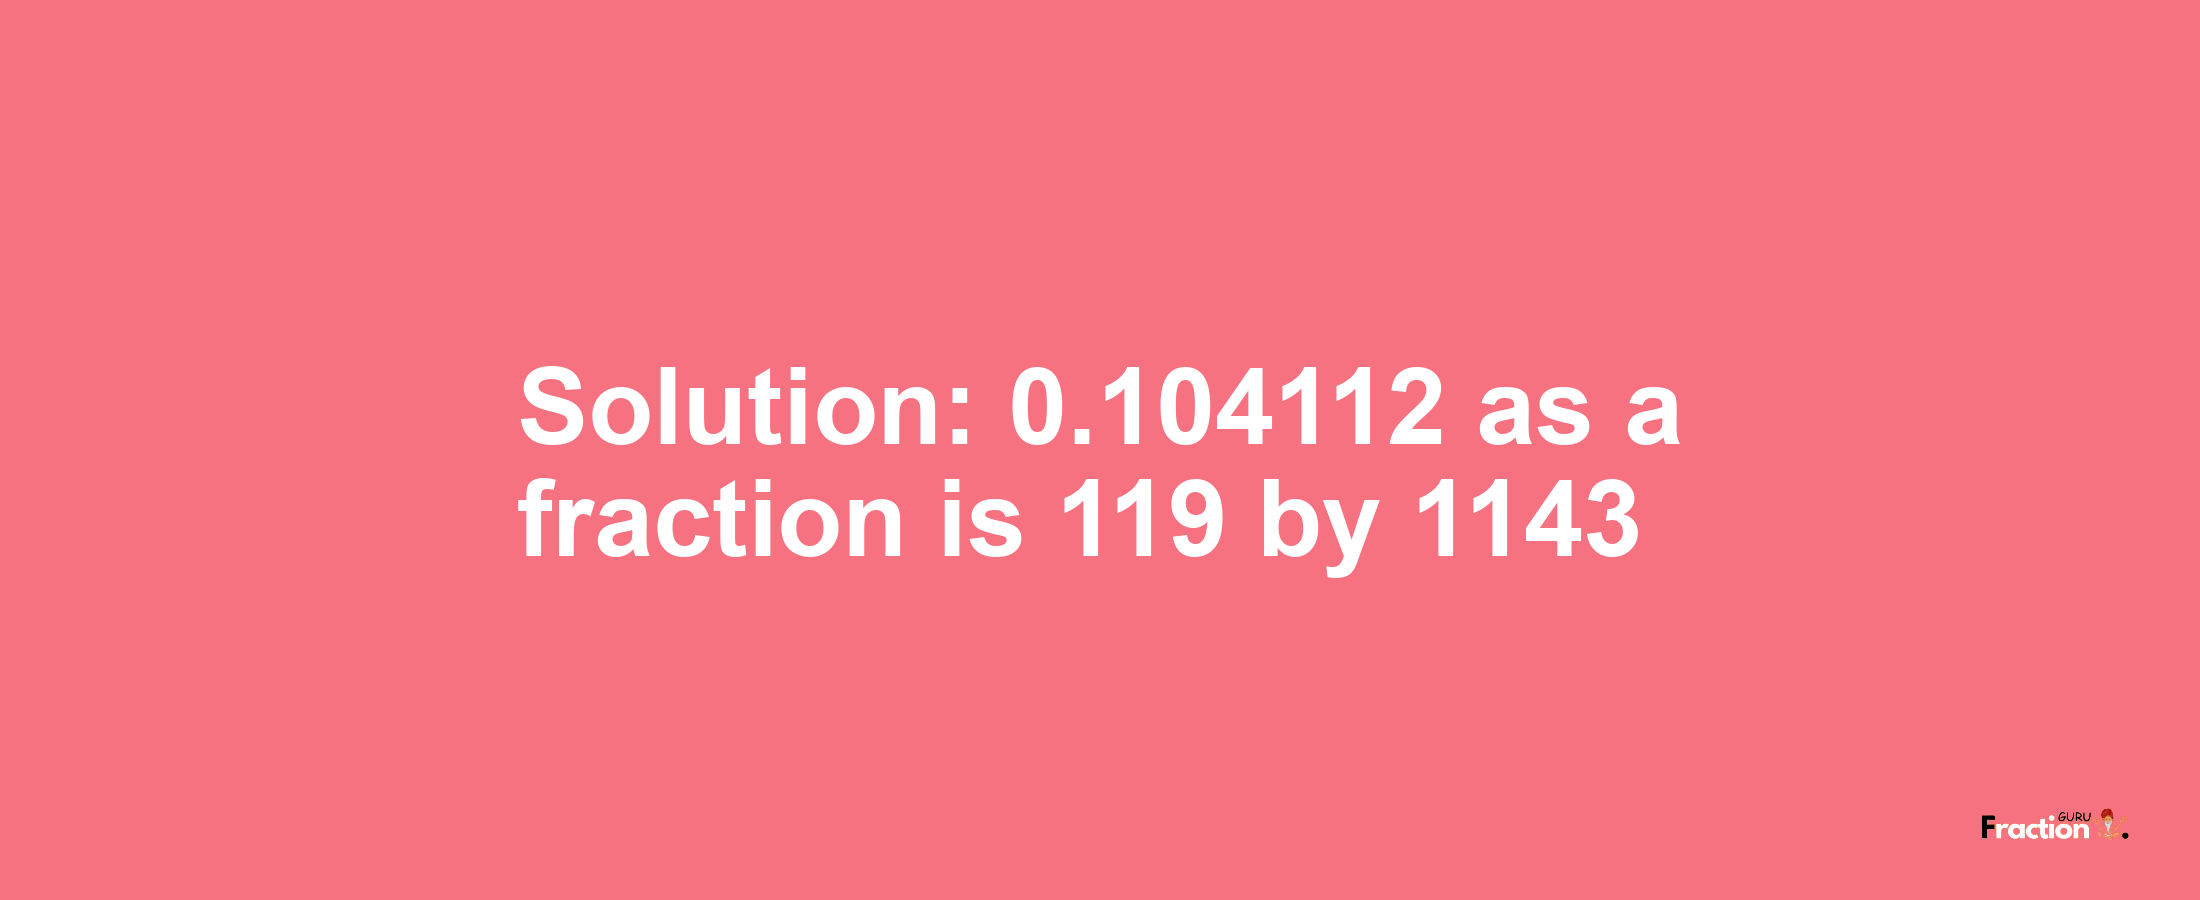 Solution:0.104112 as a fraction is 119/1143